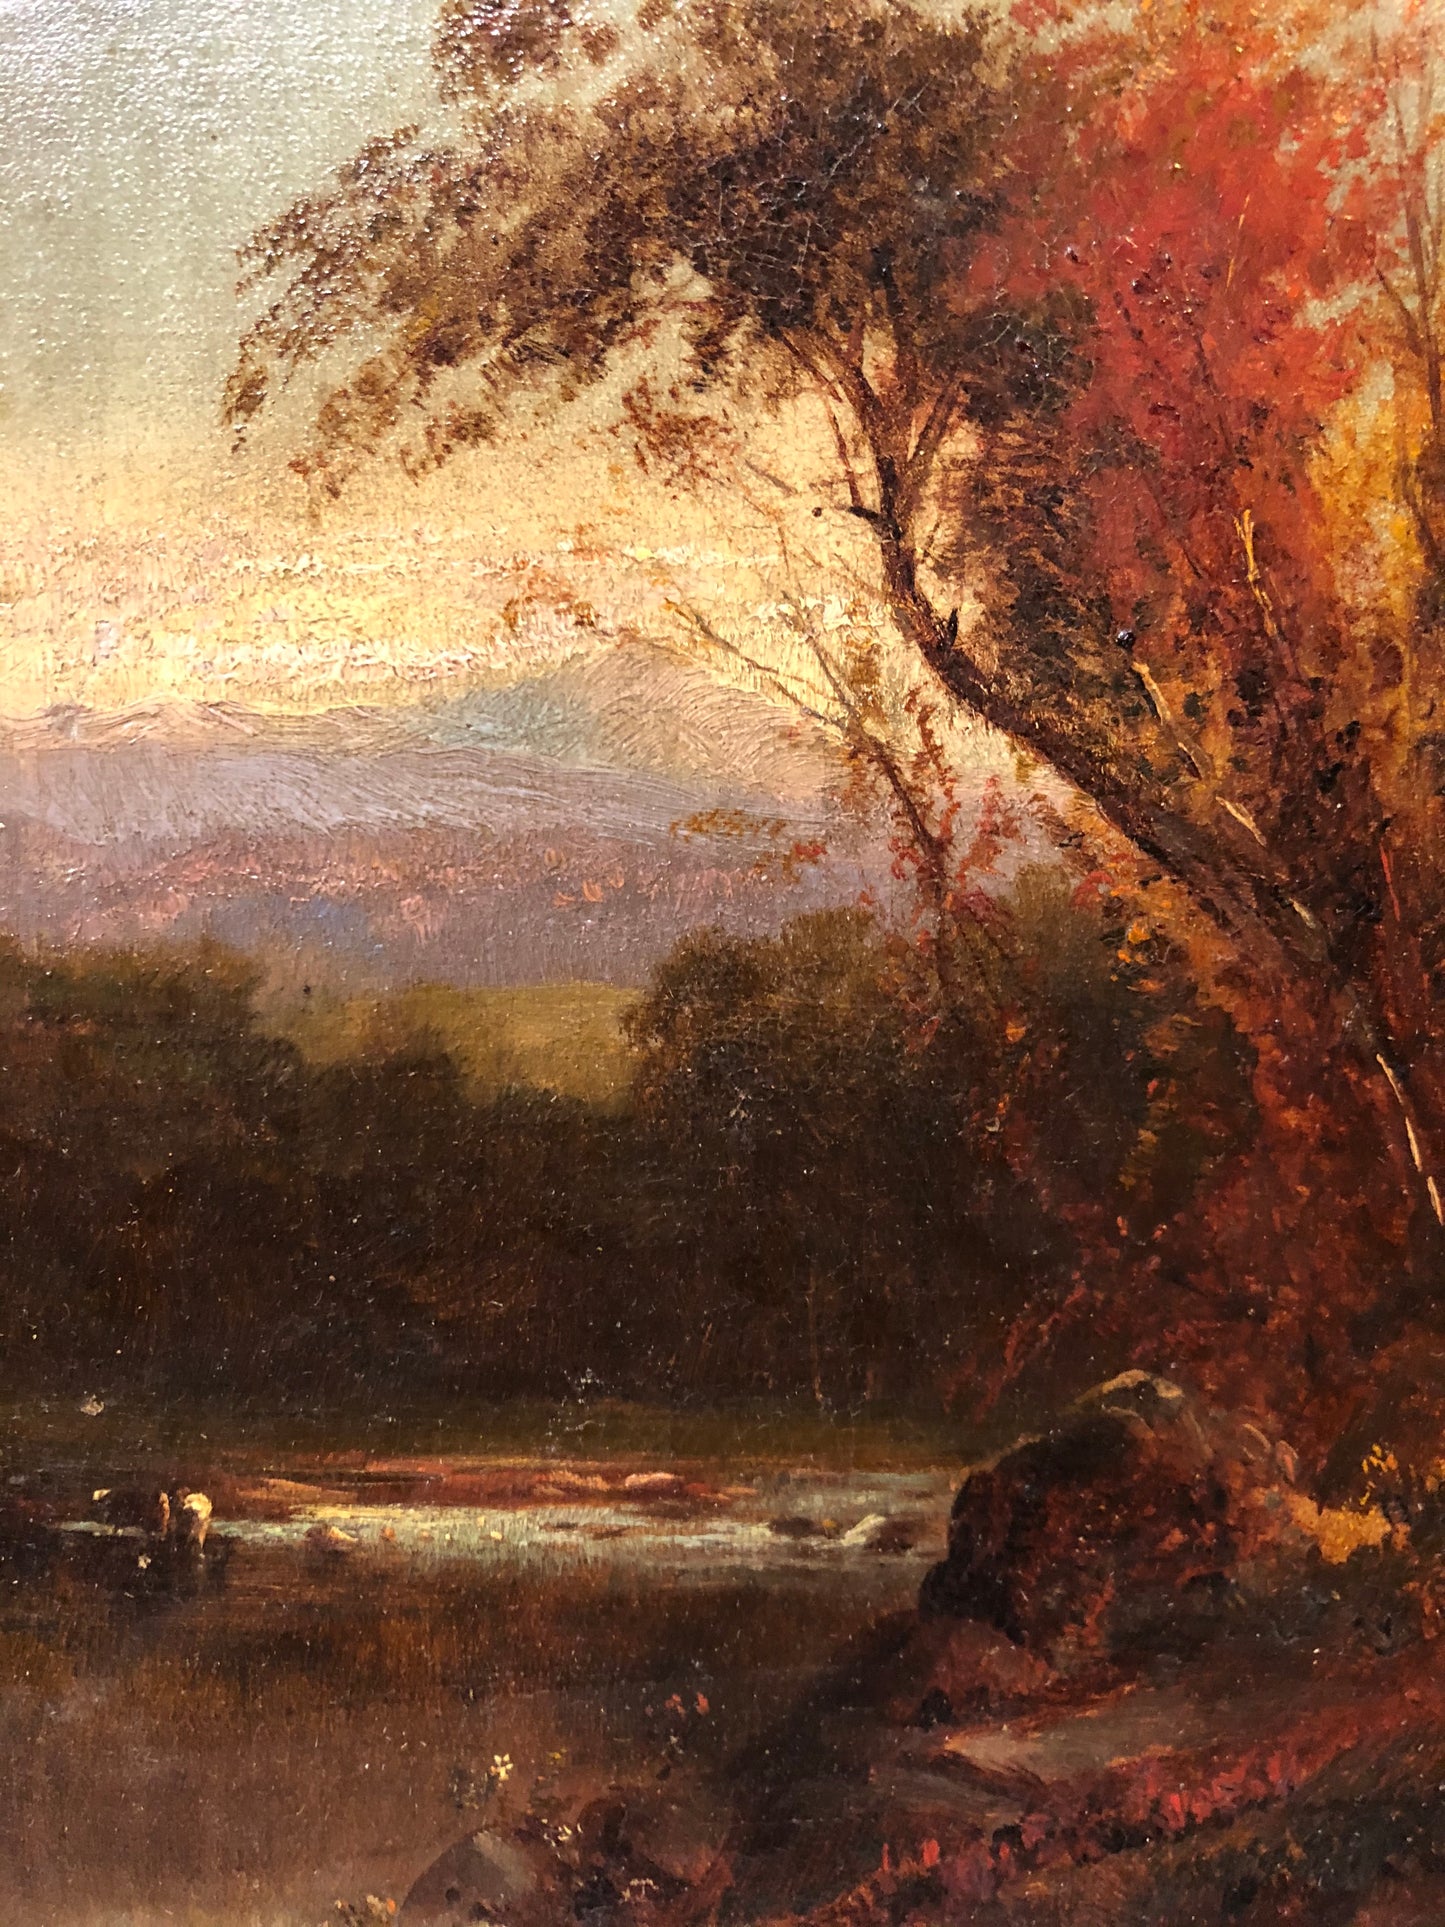 William Hart Oil on Canvas: Landscape with pond